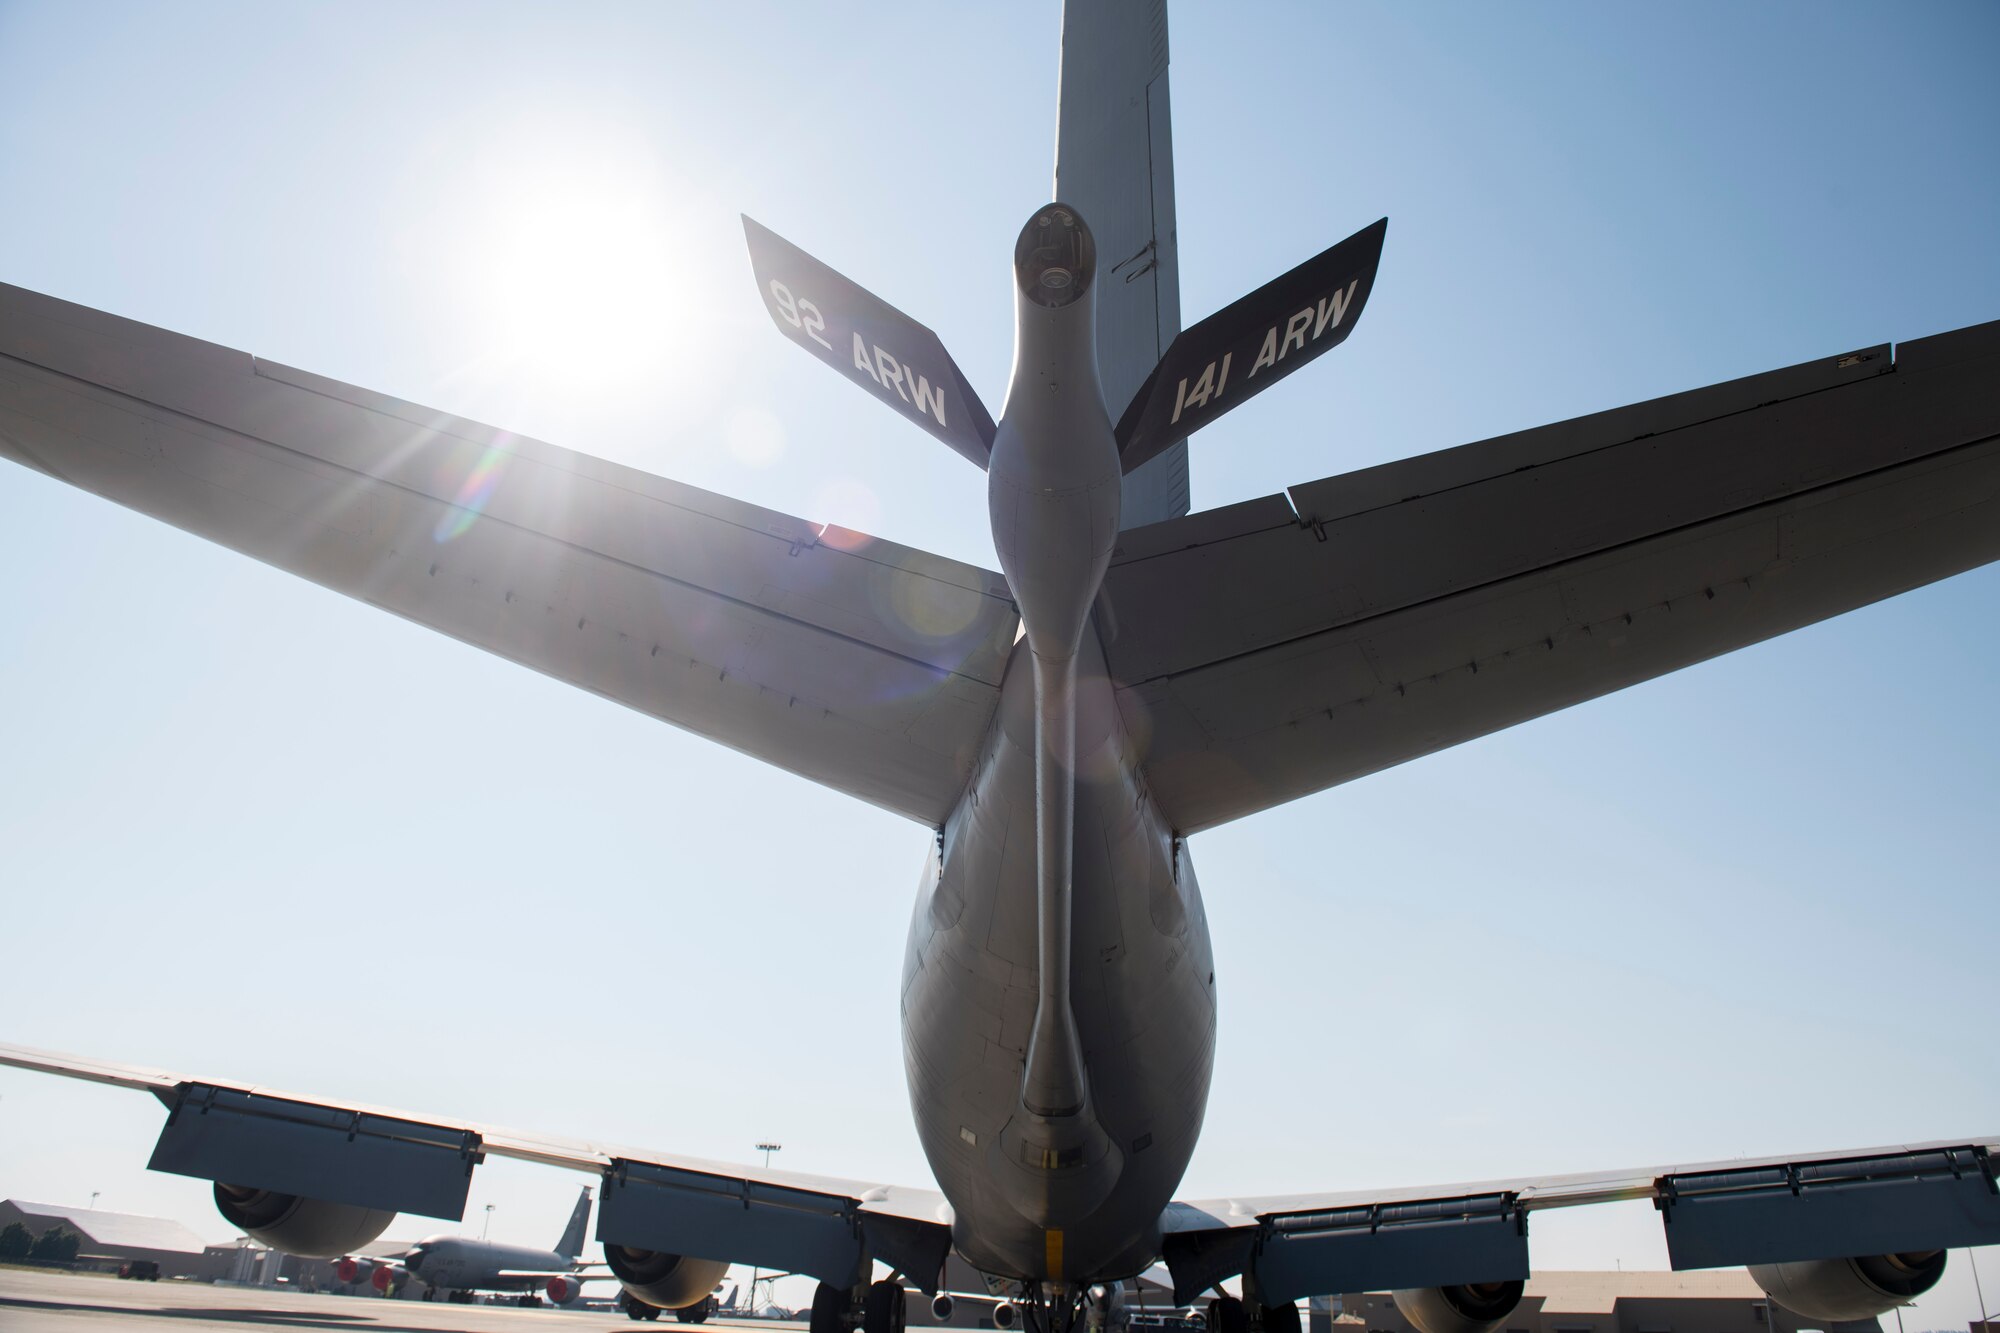 A KC-135 Stratotanker boom is prepared for take-off prior to an air refueling mission at Fairchild Air Force Base, Washington, July 29, 2020. Team Fairchild’s success in the implementation of Theory of Constraints and Continuous Process of Improvement tools, resulted in higher aircraft availability, high quality maintenance, and Fairchild paving the way for Project Tesseract to be implemented across the Air Force. (U.S. Air Force photo by Senior Airman Lawrence Sena)